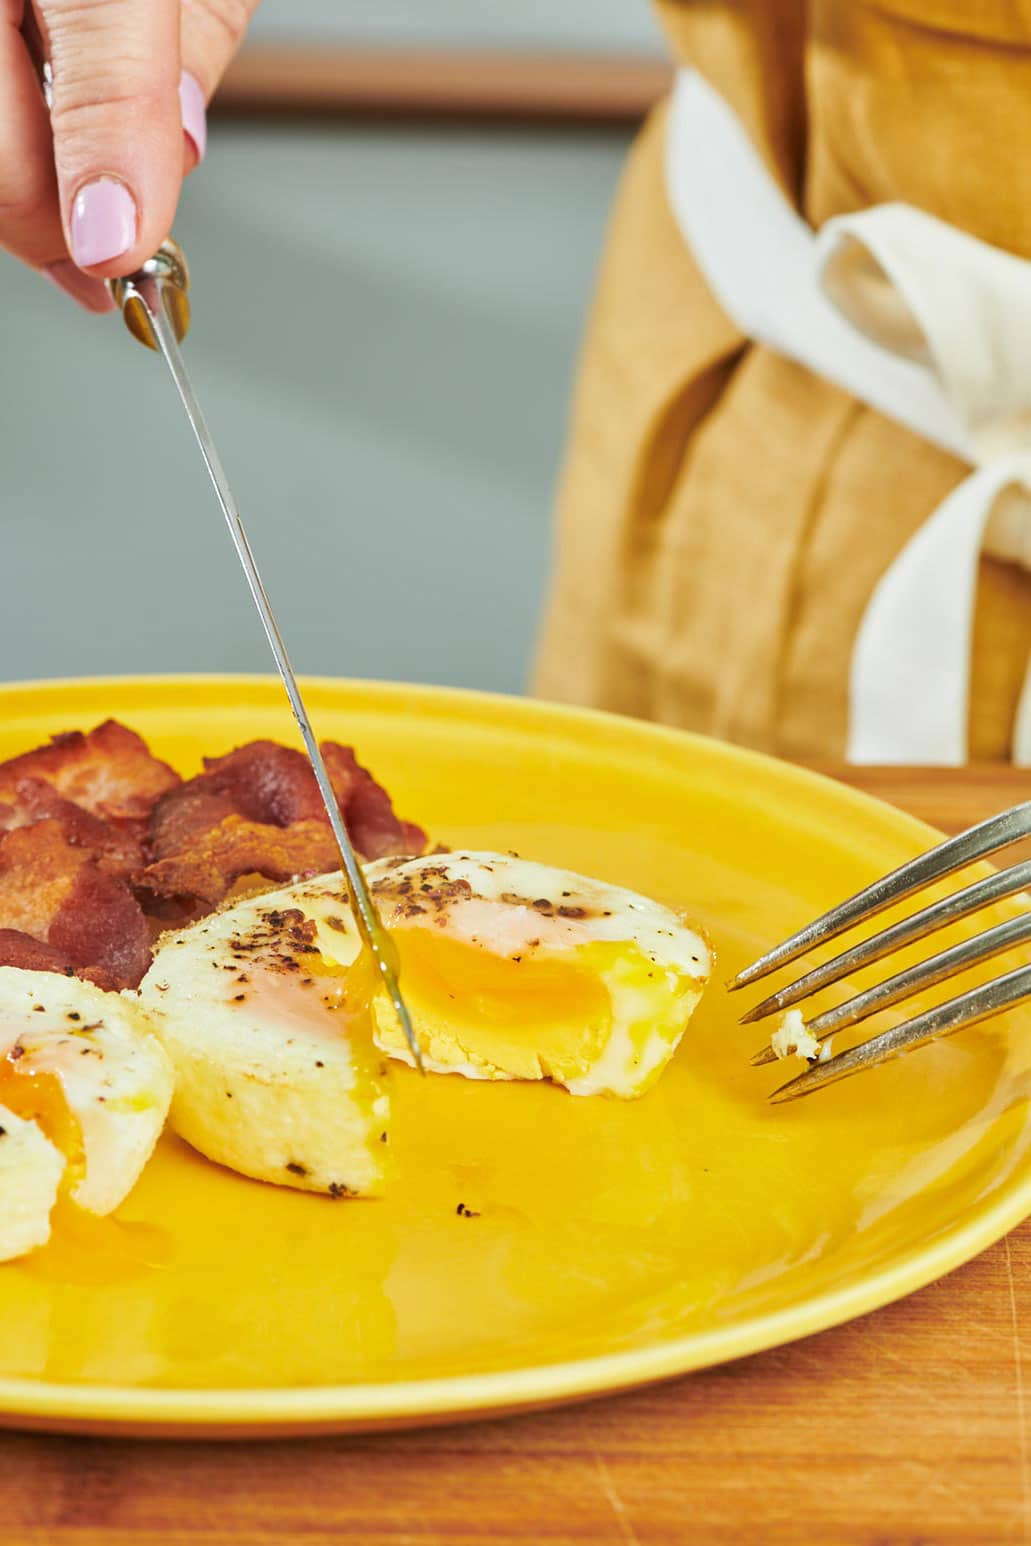 Slicing oven-baked egg with knife and fork on yellow plate.